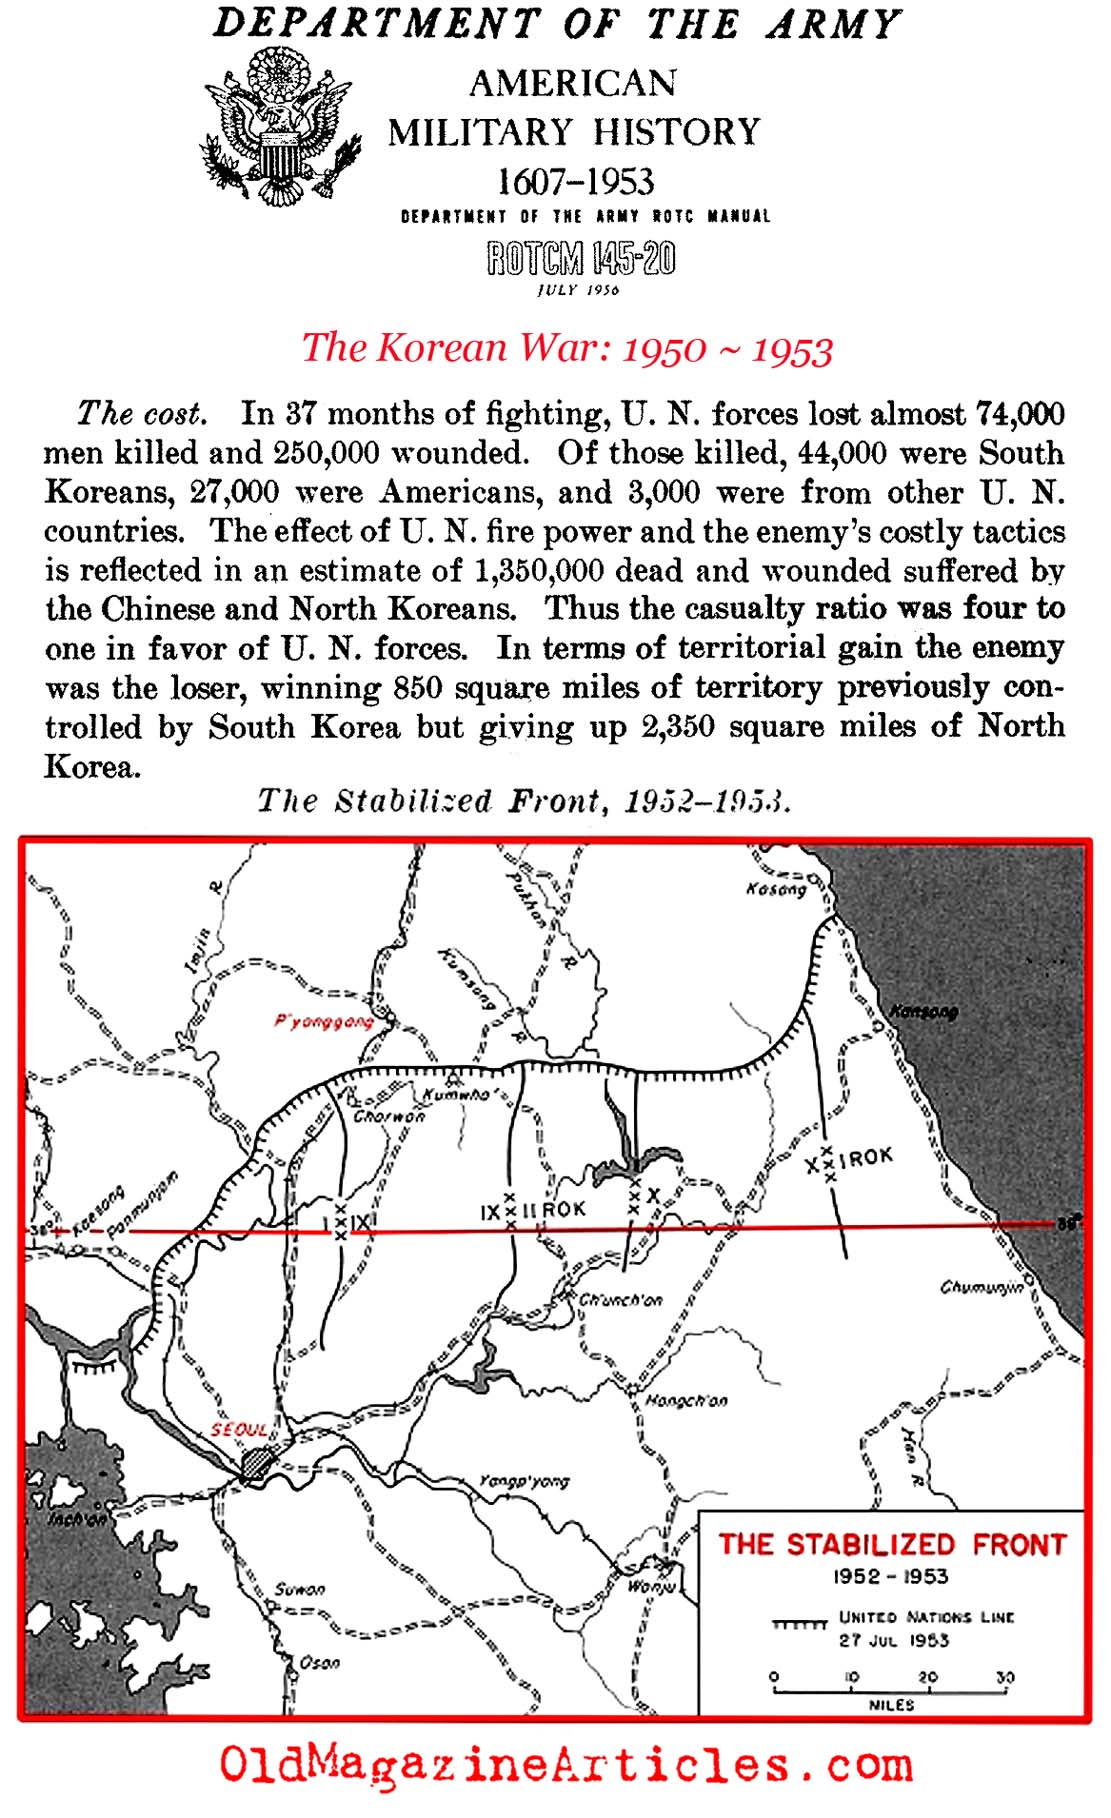 The Military Results of the Korean War (Dept. of the Army, 1956)